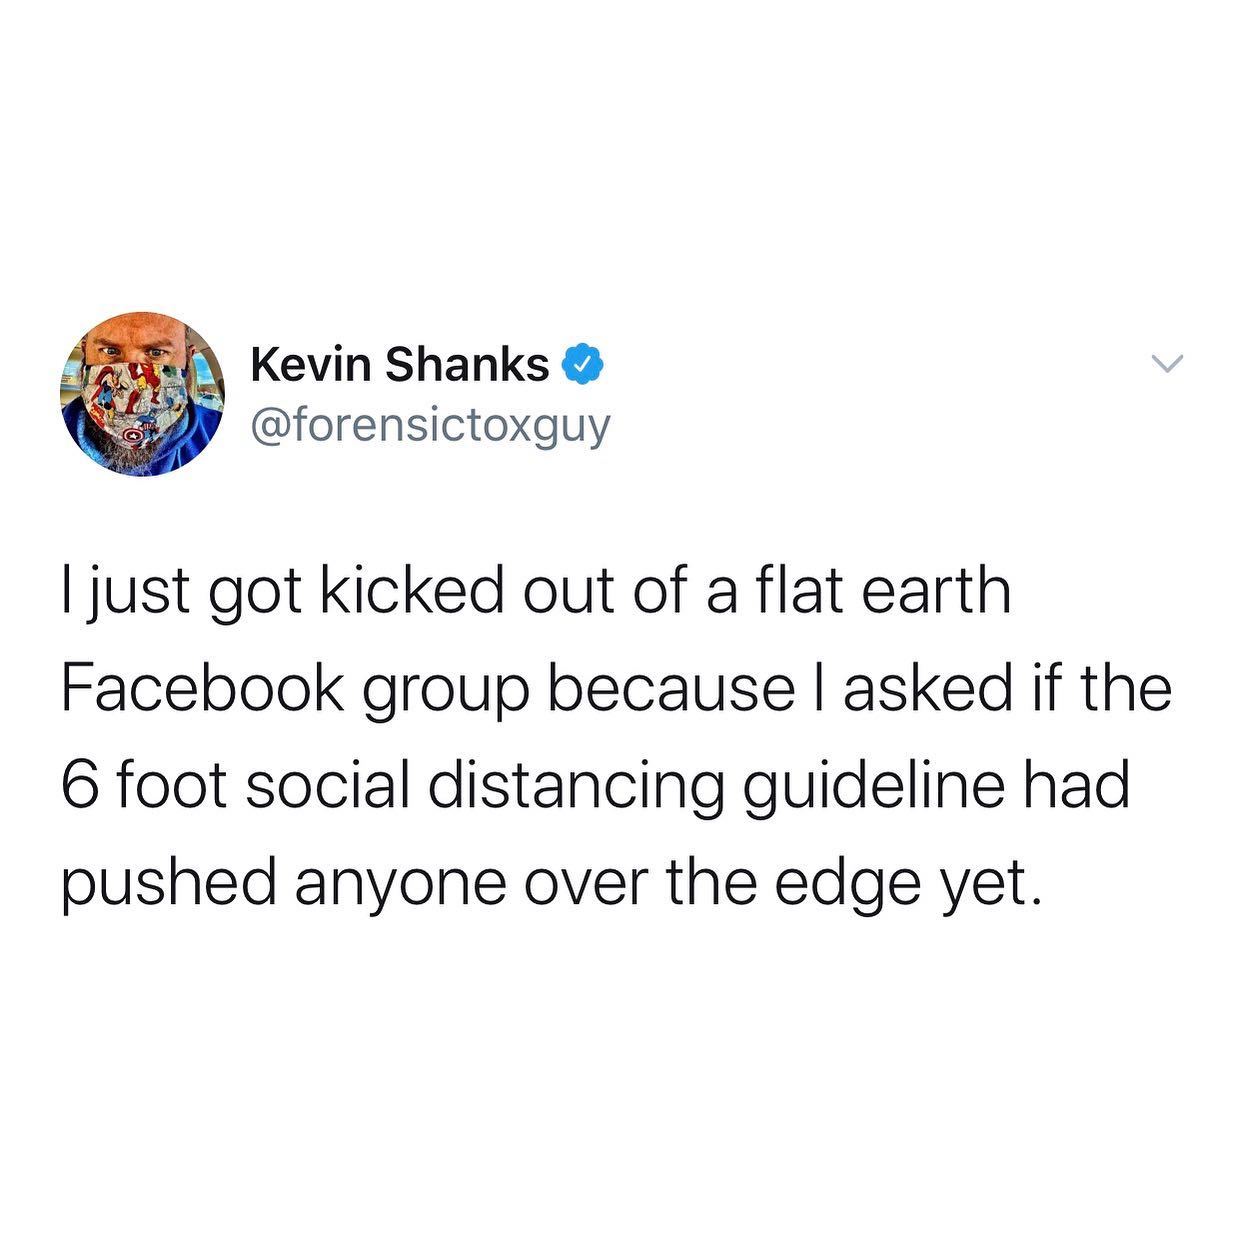 dank memes - twitter - social media bill murray - Kevin Shanks I just got kicked out of a flat earth Facebook group because I asked if the 6 foot social distancing guideline had pushed anyone over the edge yet.